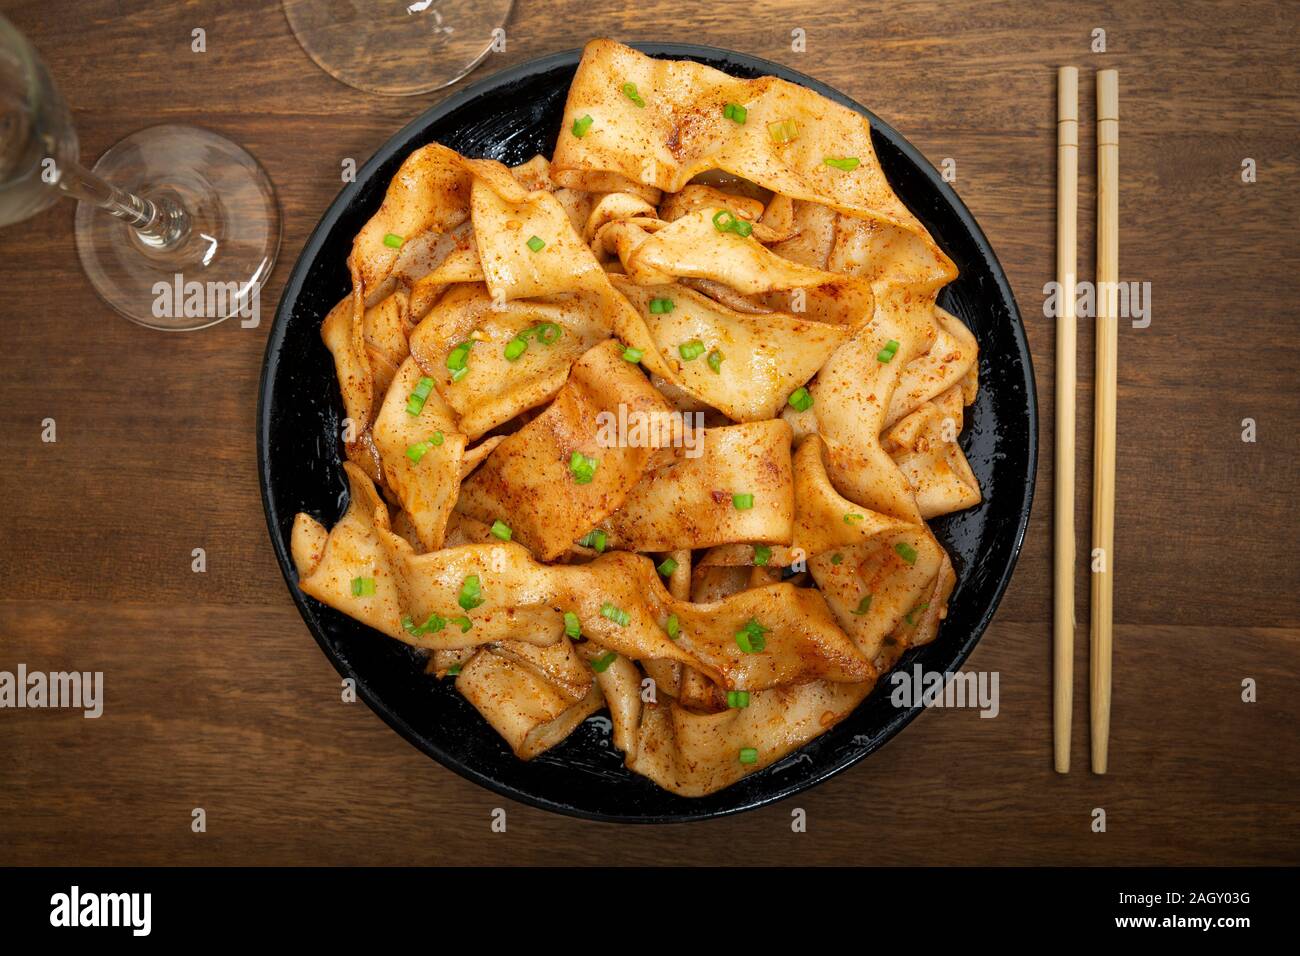 Biangbiang noodles cuisine of China's Shaanxi Province Stock Photo